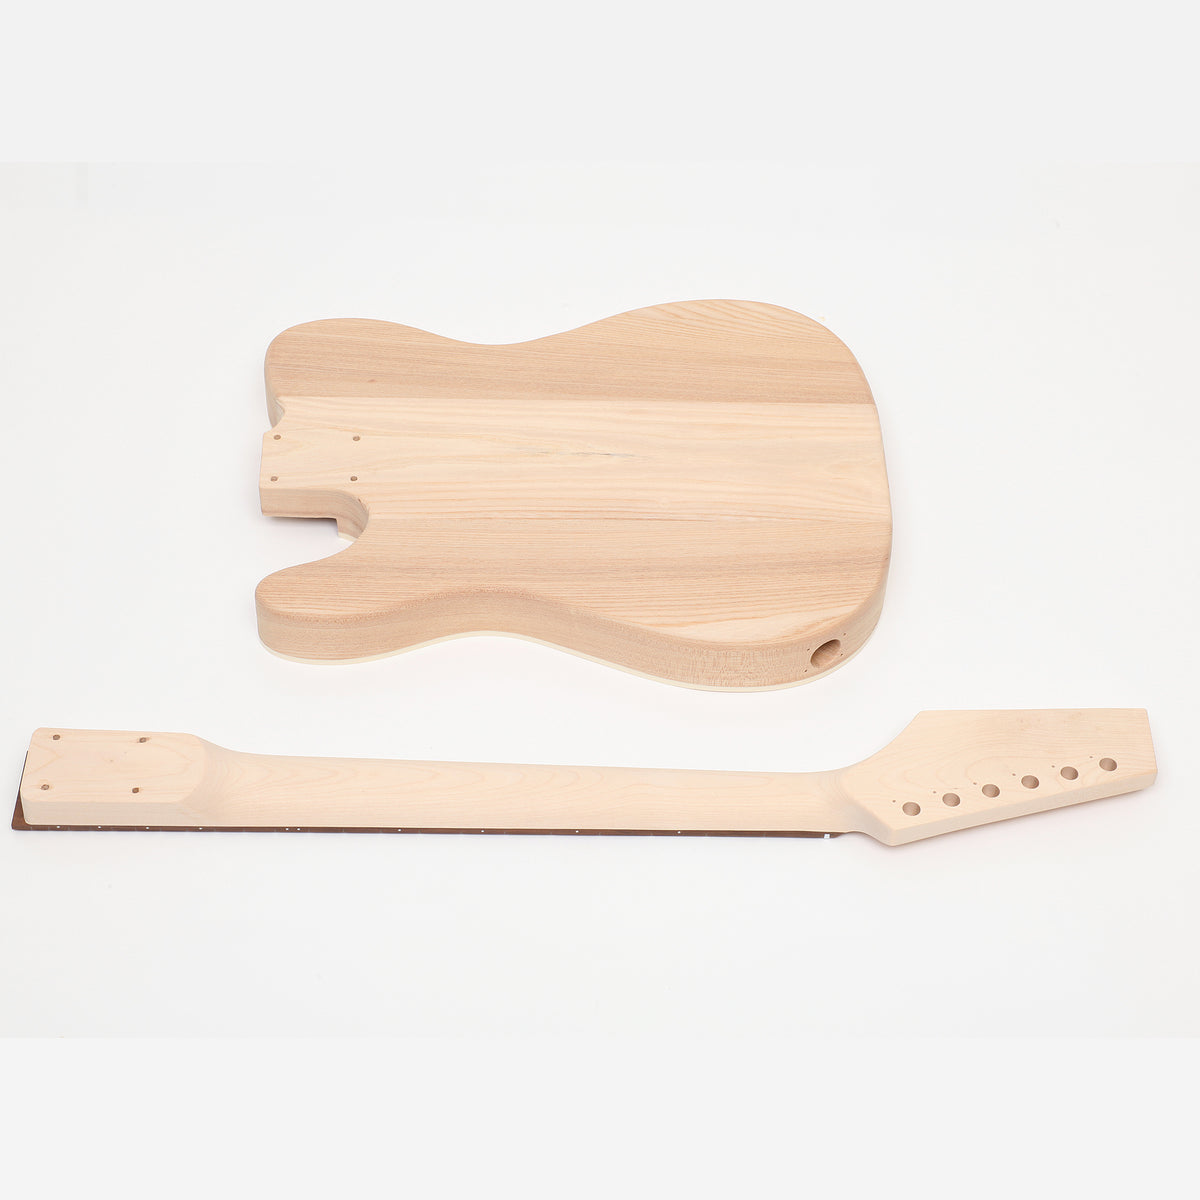 Thinline Telecaster DIY Guitar Kit  Body and Neck Back